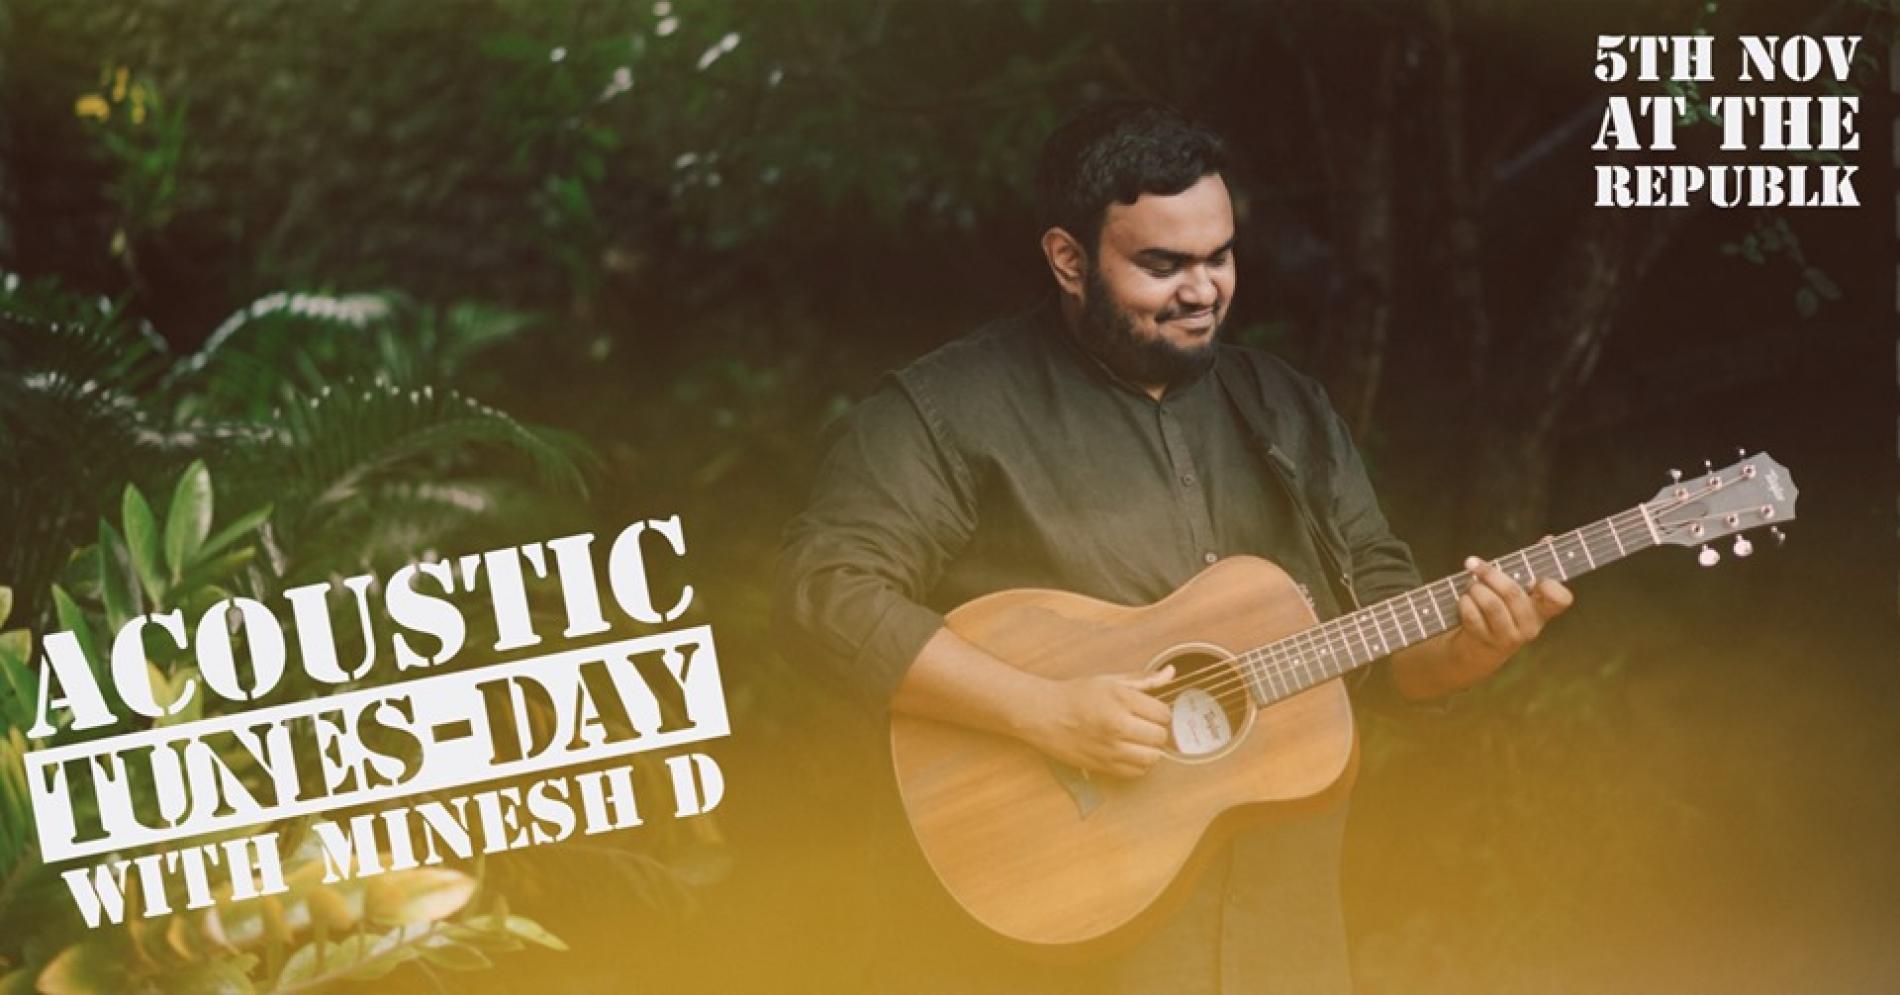 Acoustic Tunes-Day with Minesh D